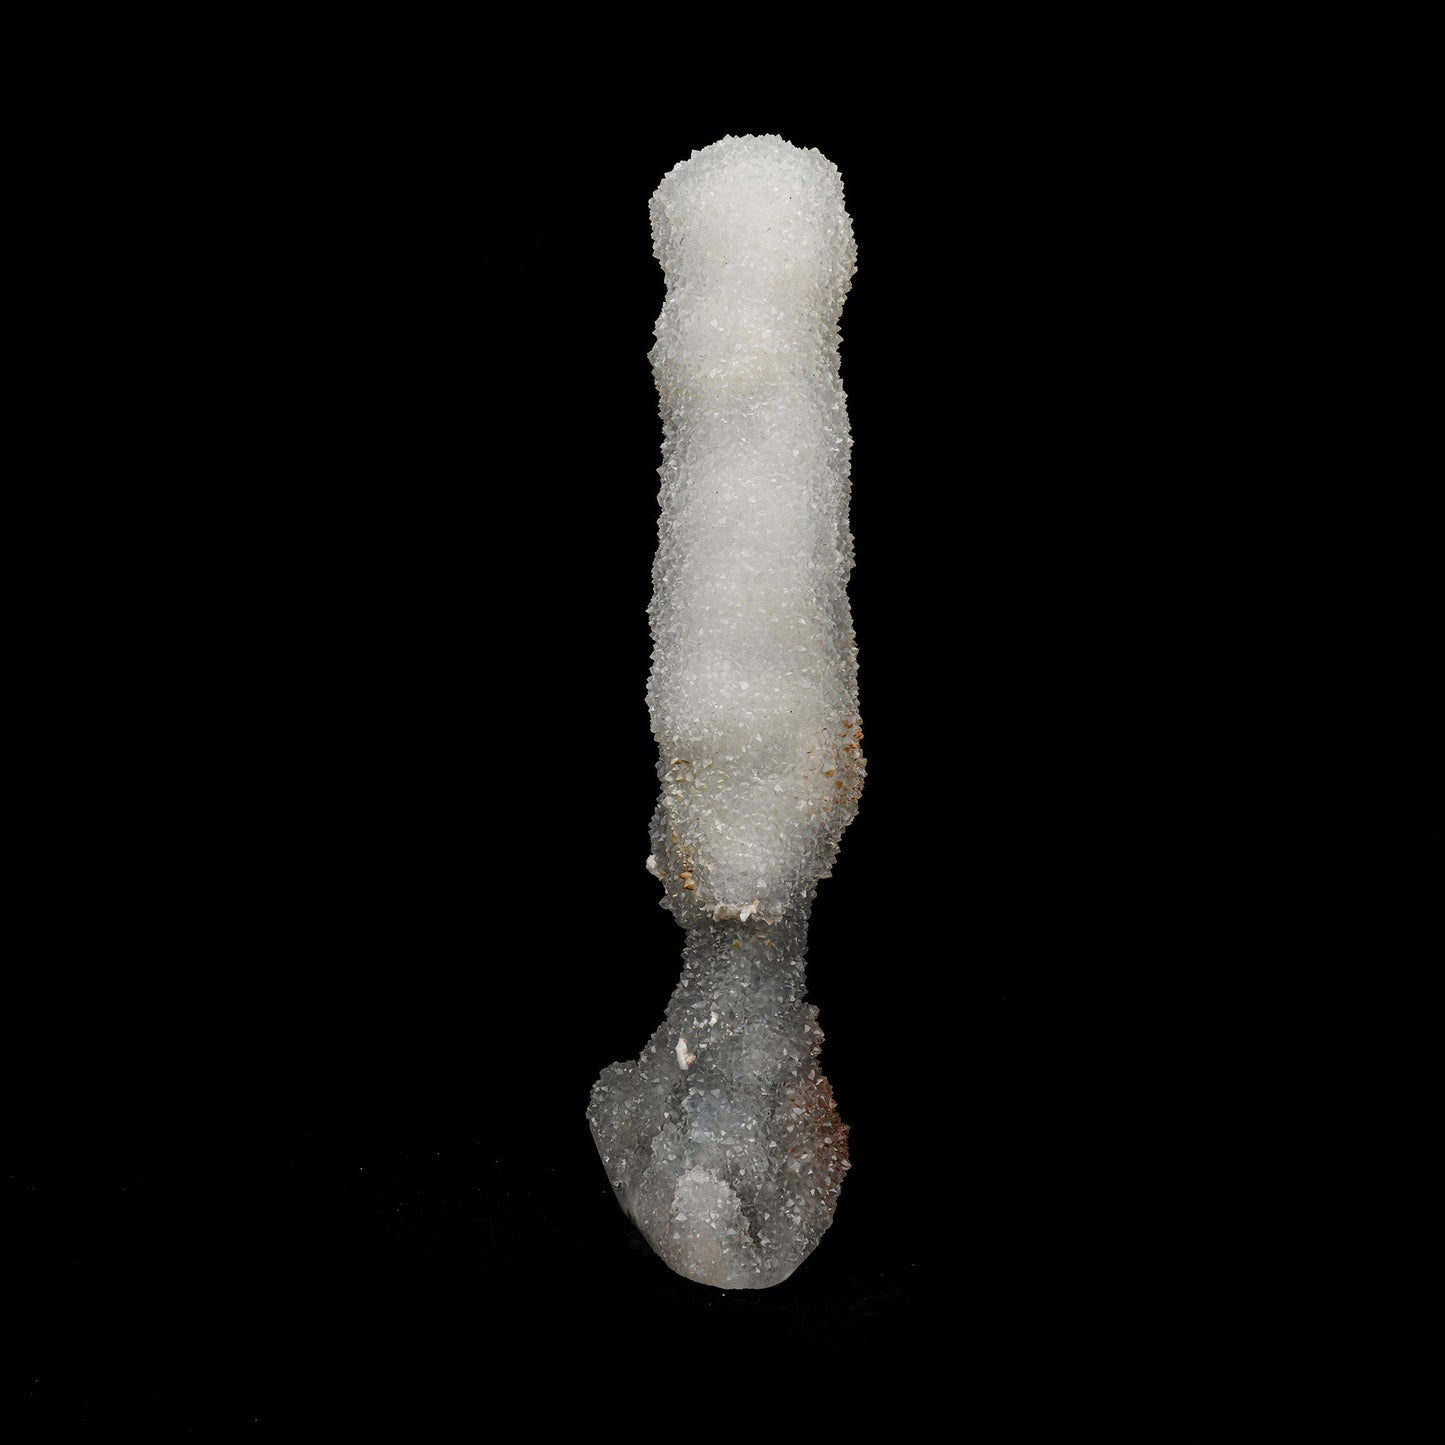 MM Quartz Sprakling Stalactite Natural Mineral Specimen # B 5169  https://www.superbminerals.us/products/mm-quartz-sprakling-stalactite-natural-mineral-specimen-b-5169  Features: Natural manufactured MM Quartz Stalactite from Nashik, India.This sculpture is self-standing and will look amazing in any collection, exhibition, or alter. Primary Mineral(s): MM Quartz Secondary Mineral(s): N/AMatrix: N/A 10 Inch x 3 InchWeight : 877 GmsLocality: Nashik, Maharashtra, 